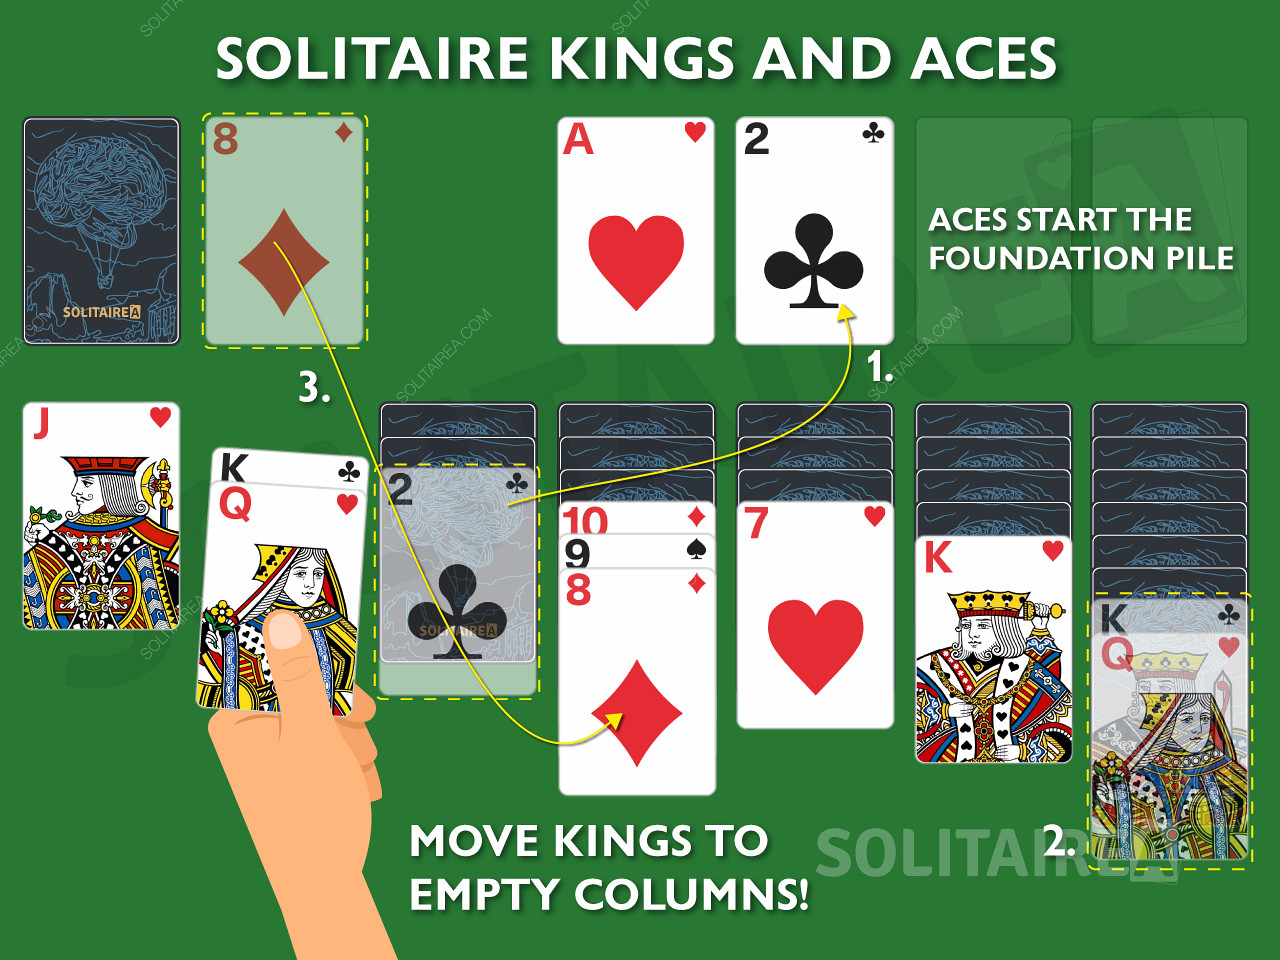 Kings and Aces are important cards in Solitaire as they are allowed unique moves.